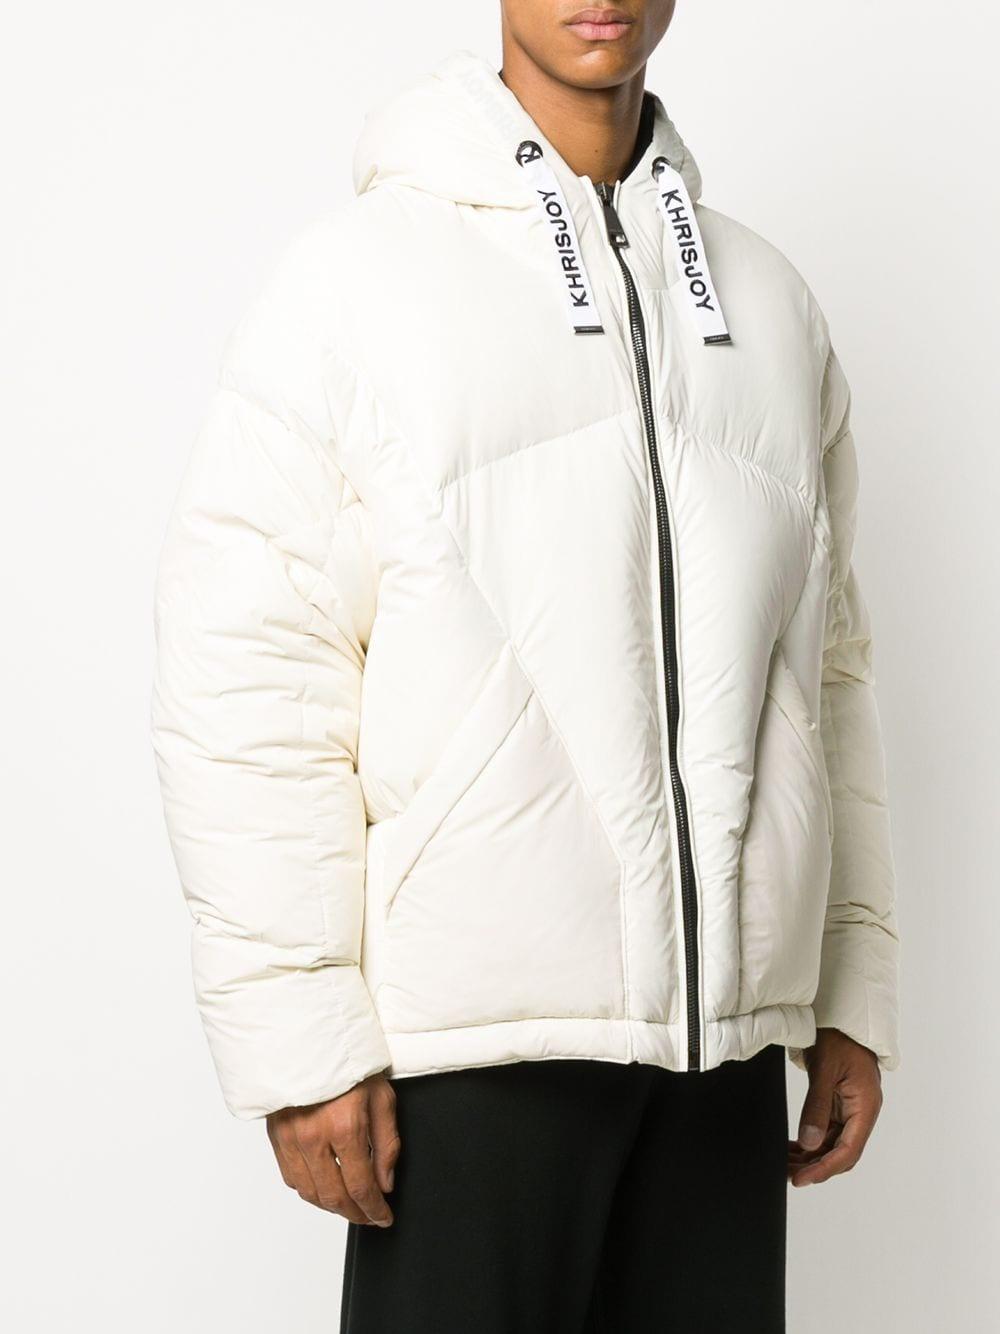 Khrisjoy Synthetic Hooded Down Puffer Jacket. in White for Men - Lyst